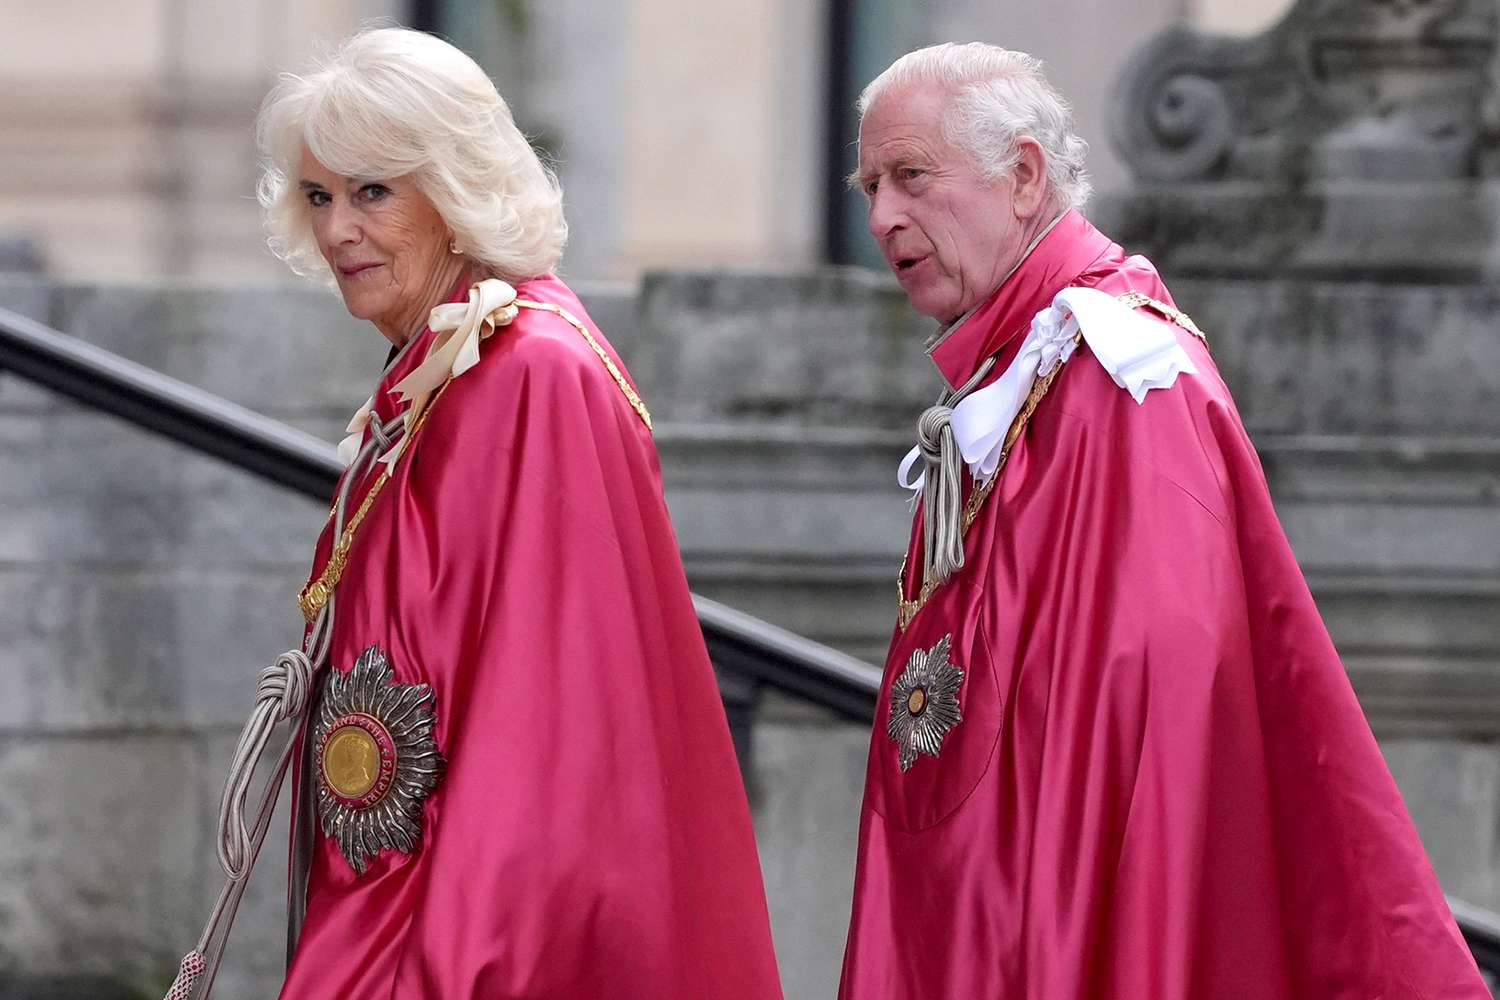 King Charles and Queen Camilla Return to St. Paul's Cathedral for Service After Missing Prince Harry’s Event